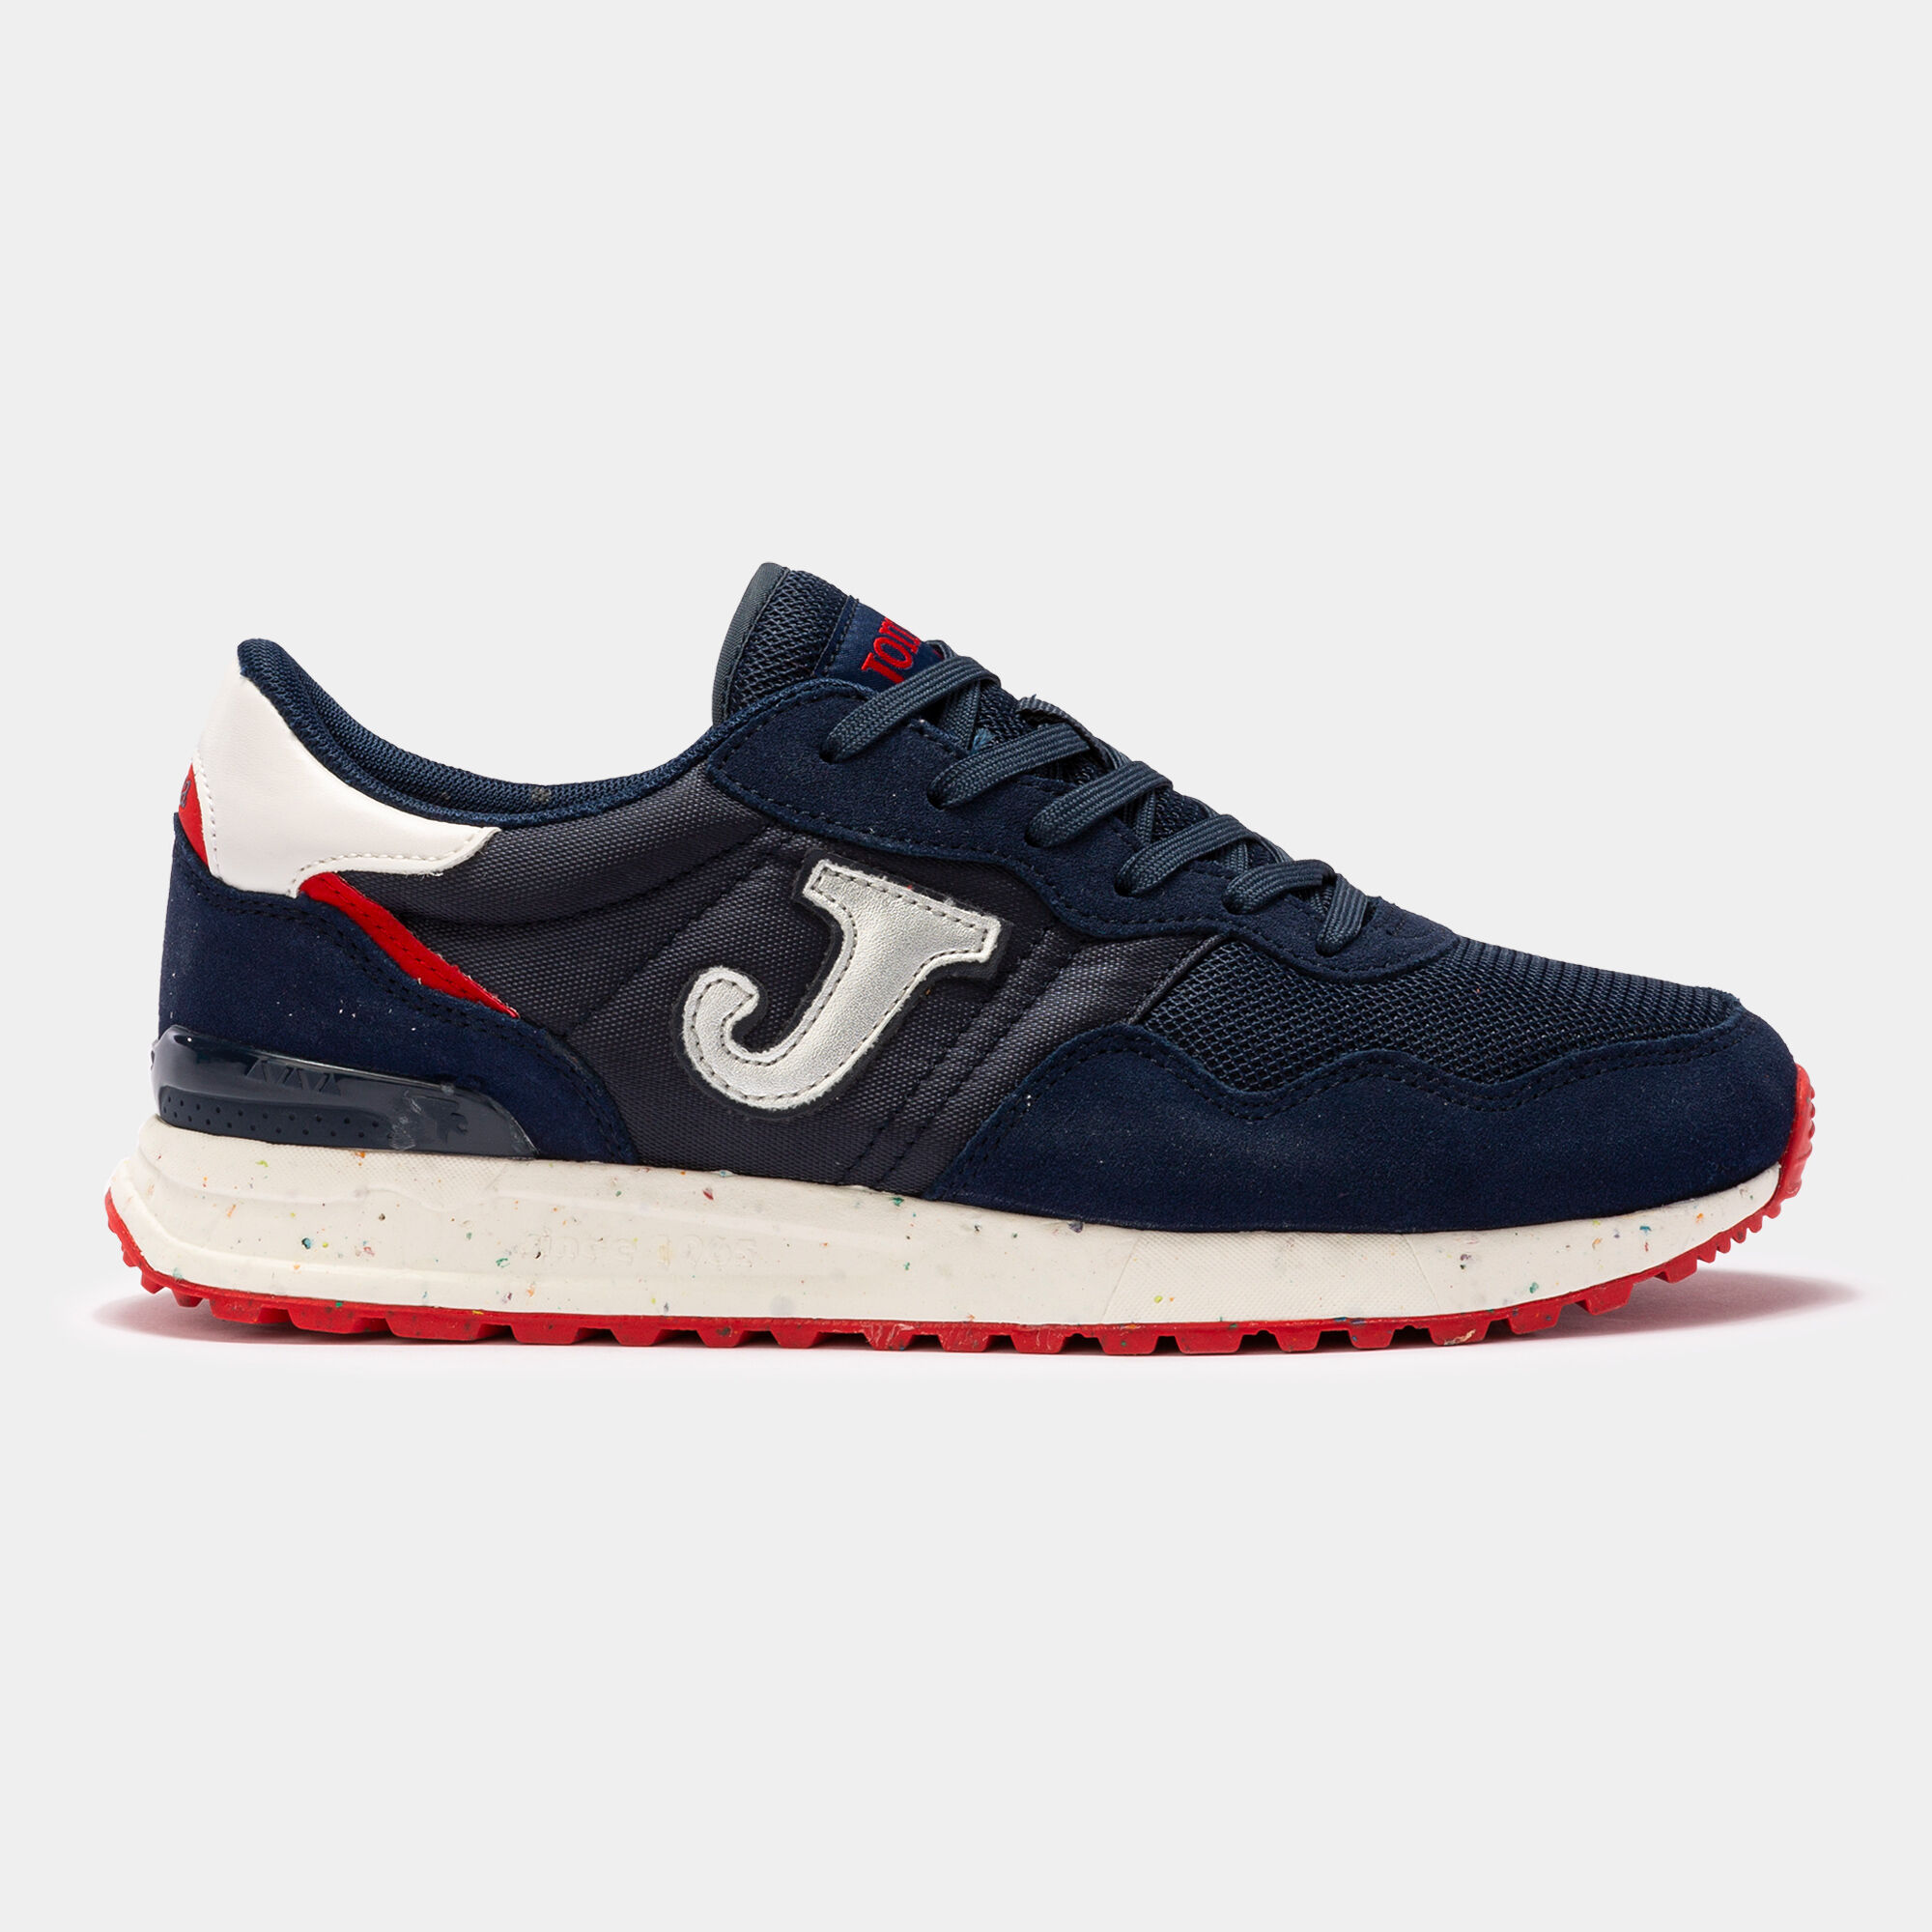 CASUAL SHOES C.367 22 WOMAN NAVY BLUE RED